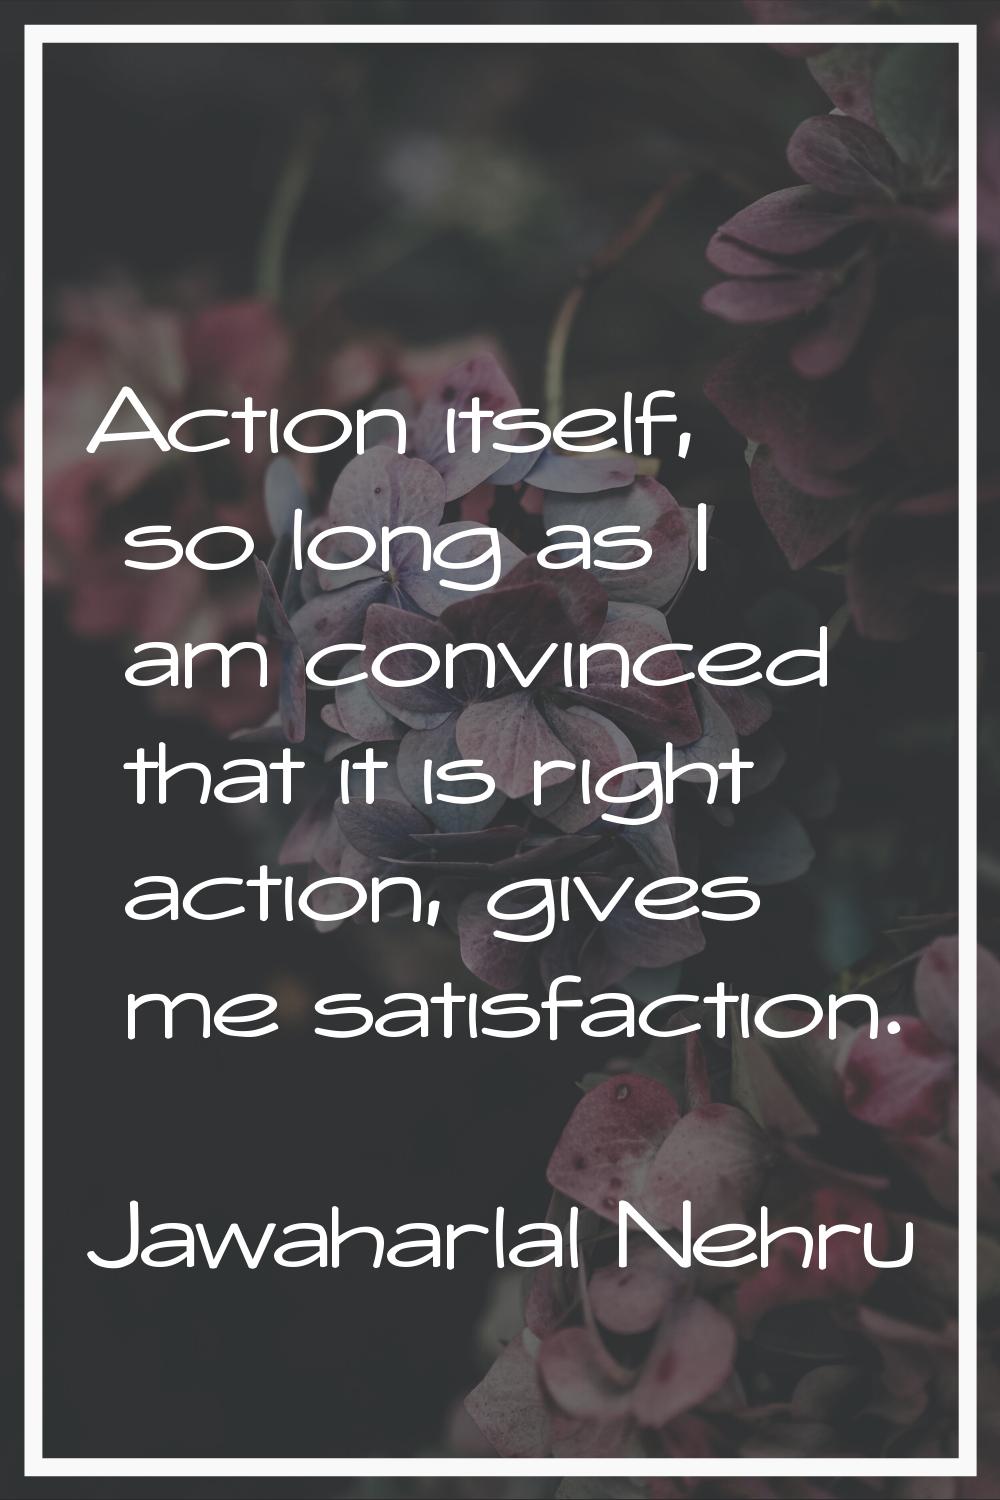 Action itself, so long as I am convinced that it is right action, gives me satisfaction.